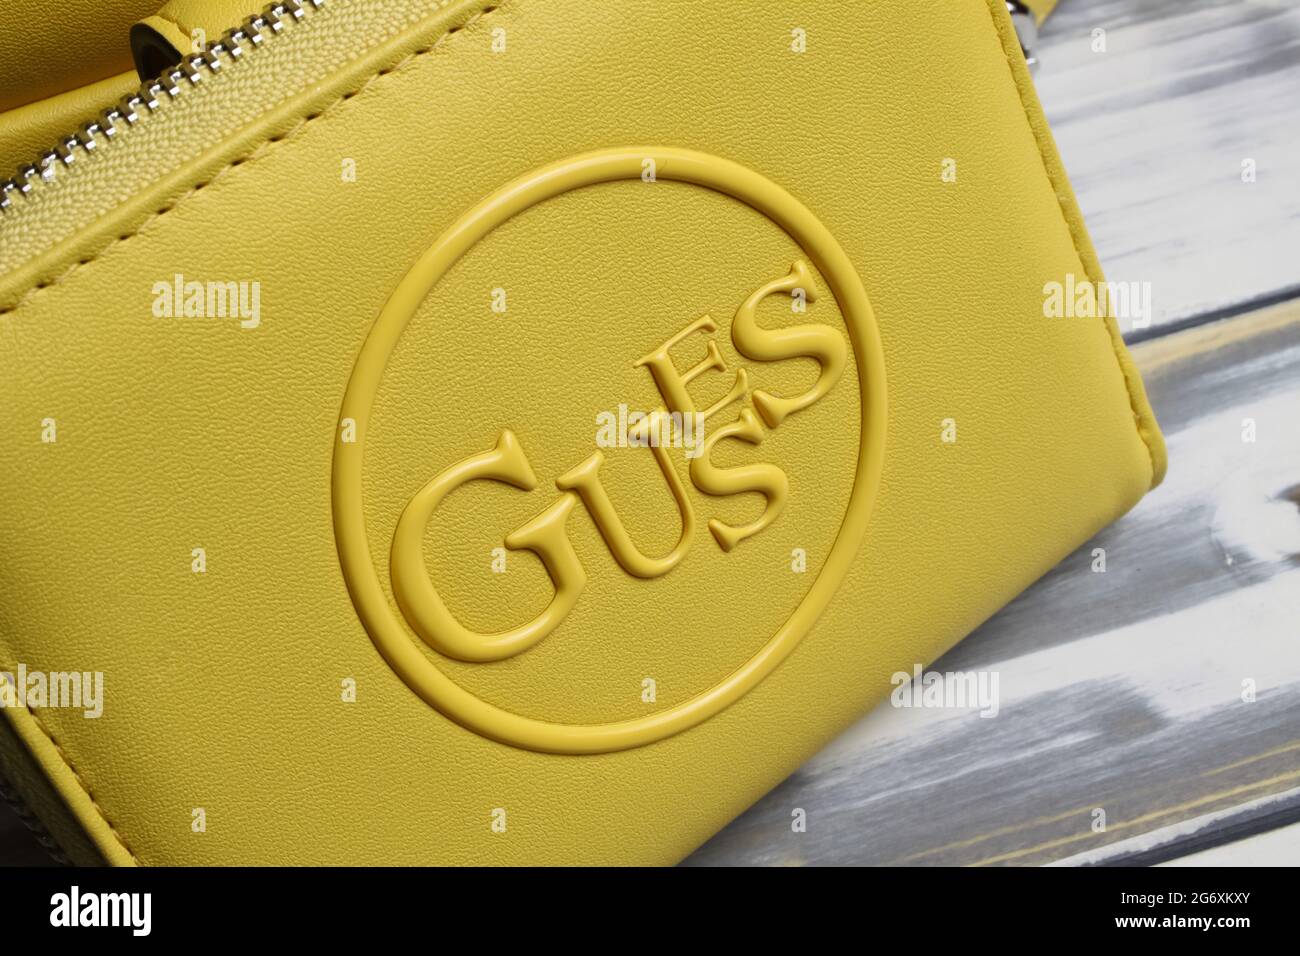 Viersen, Germany - July 1. 2021: Closeup of yellow purse with logo lettering of guess fashion company Stock Photo - Alamy